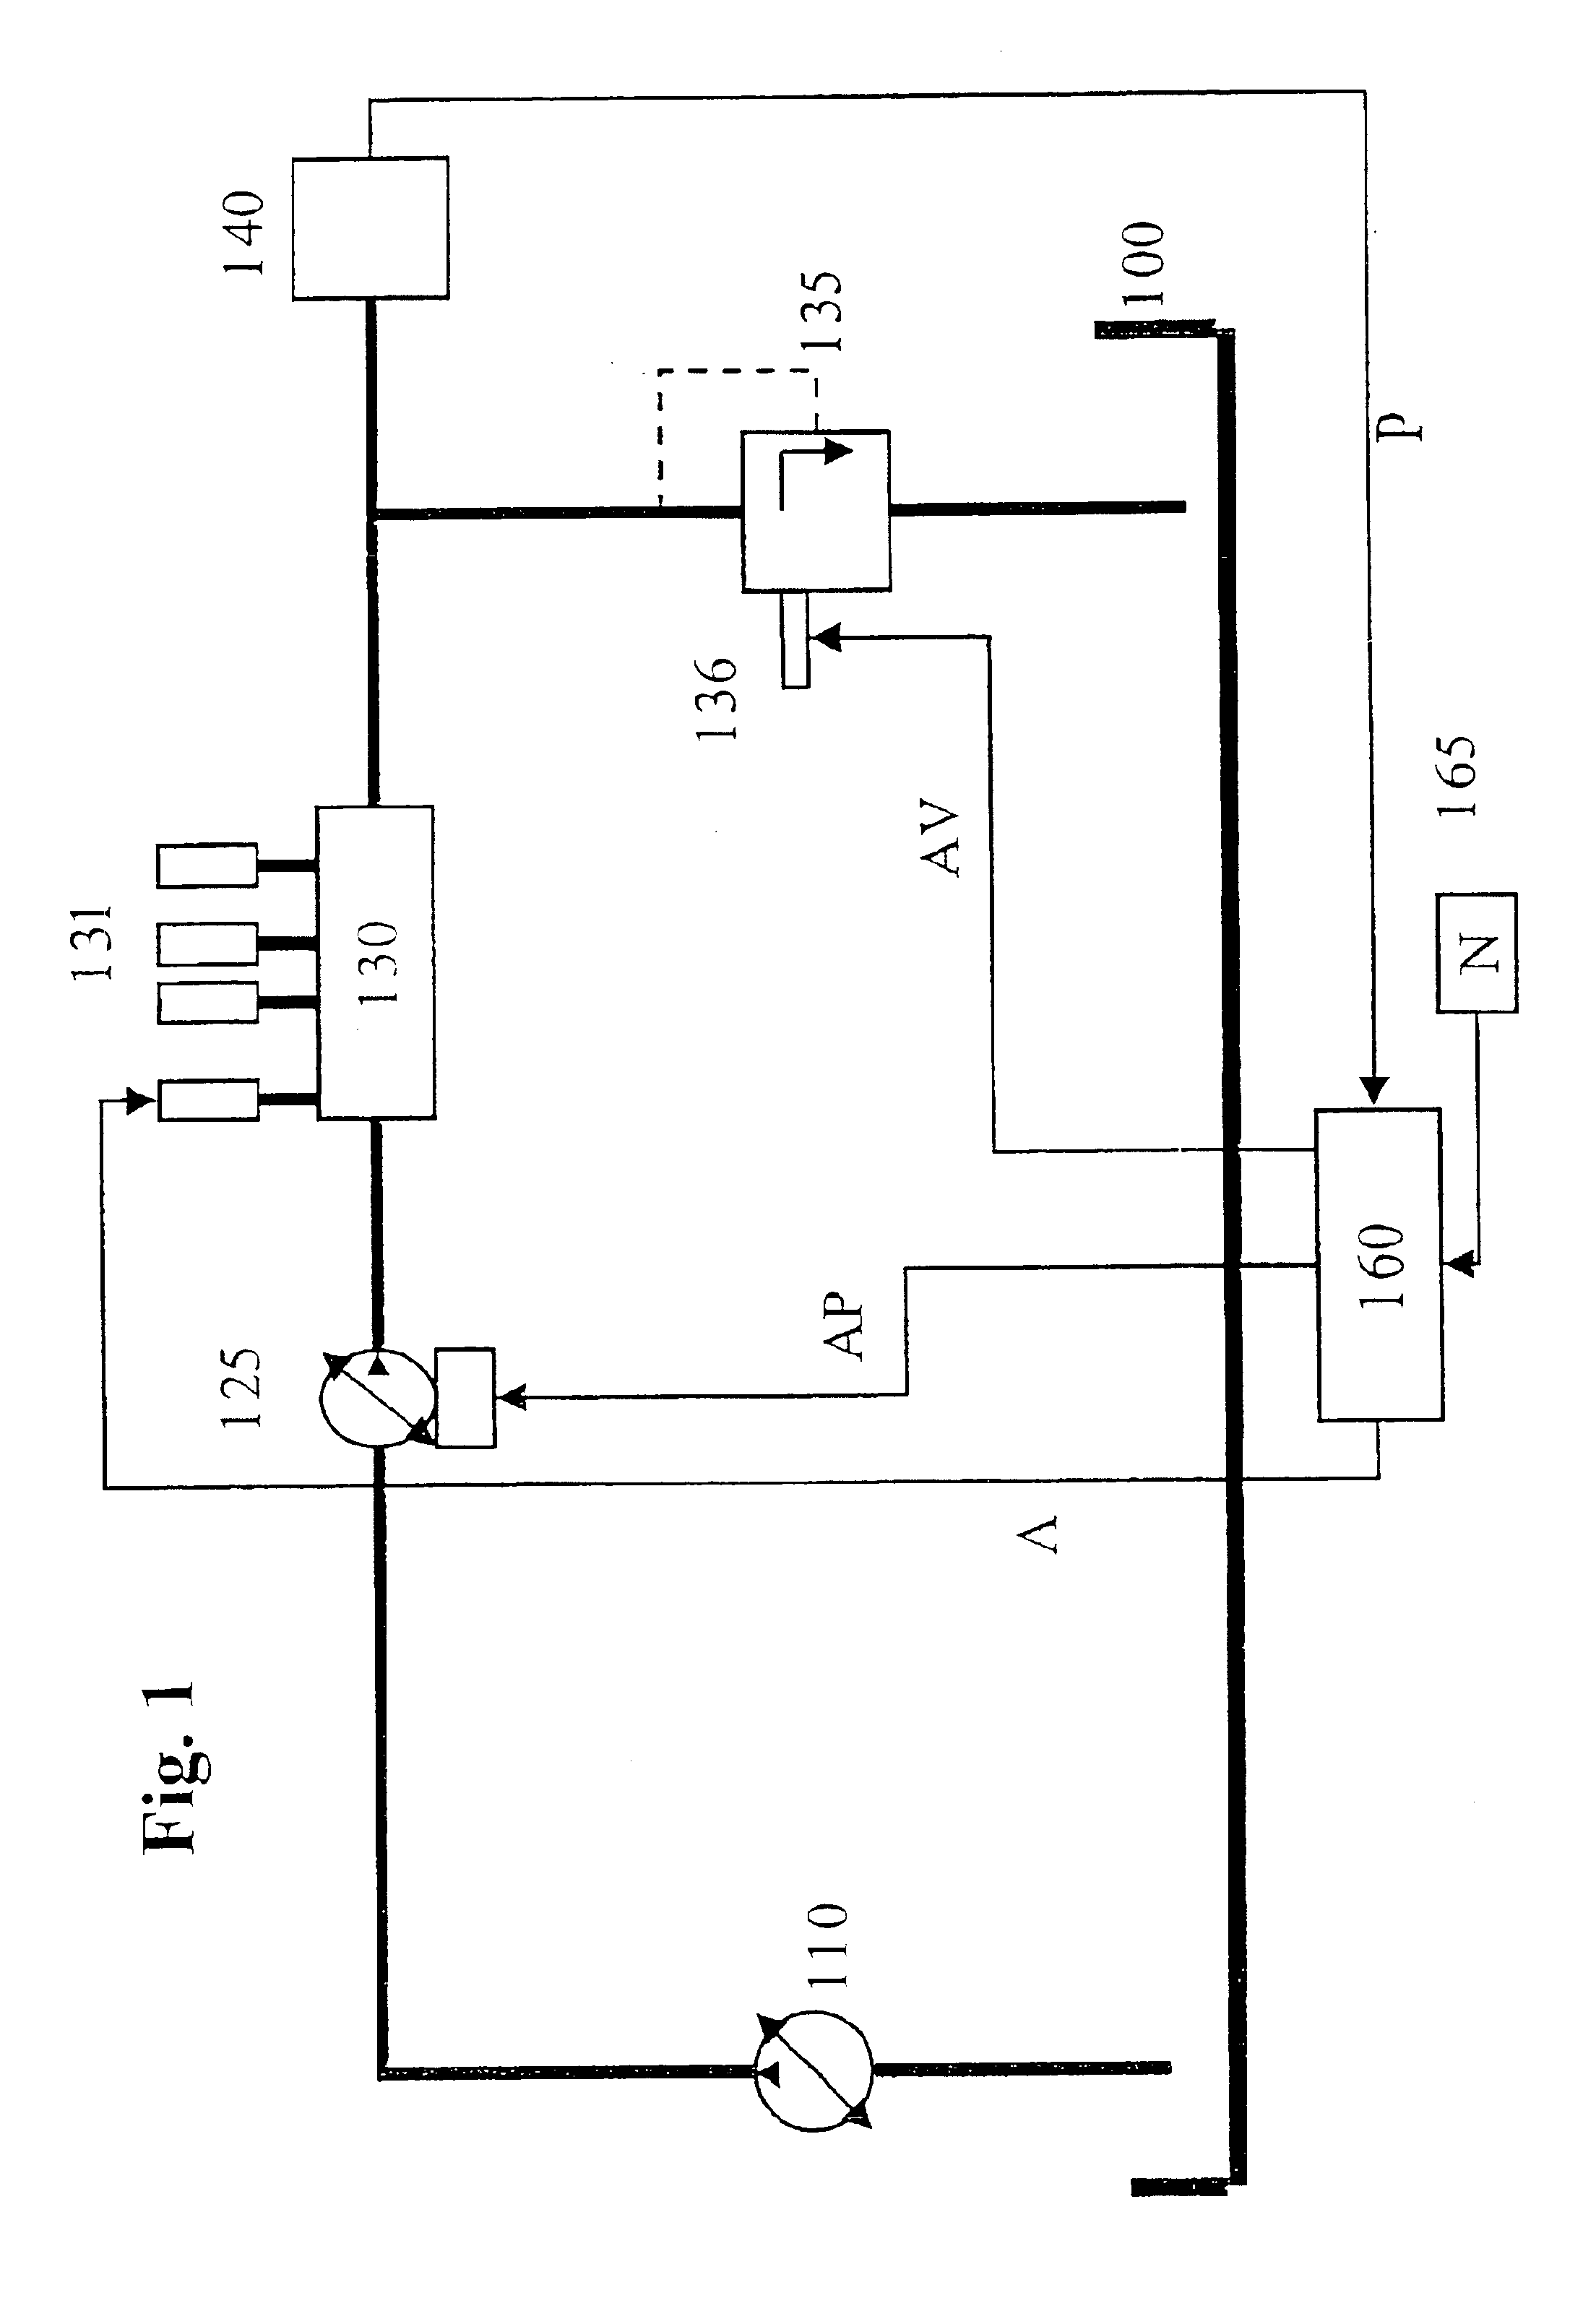 Method and device for monitoring a fuel system of an internal combustion engine